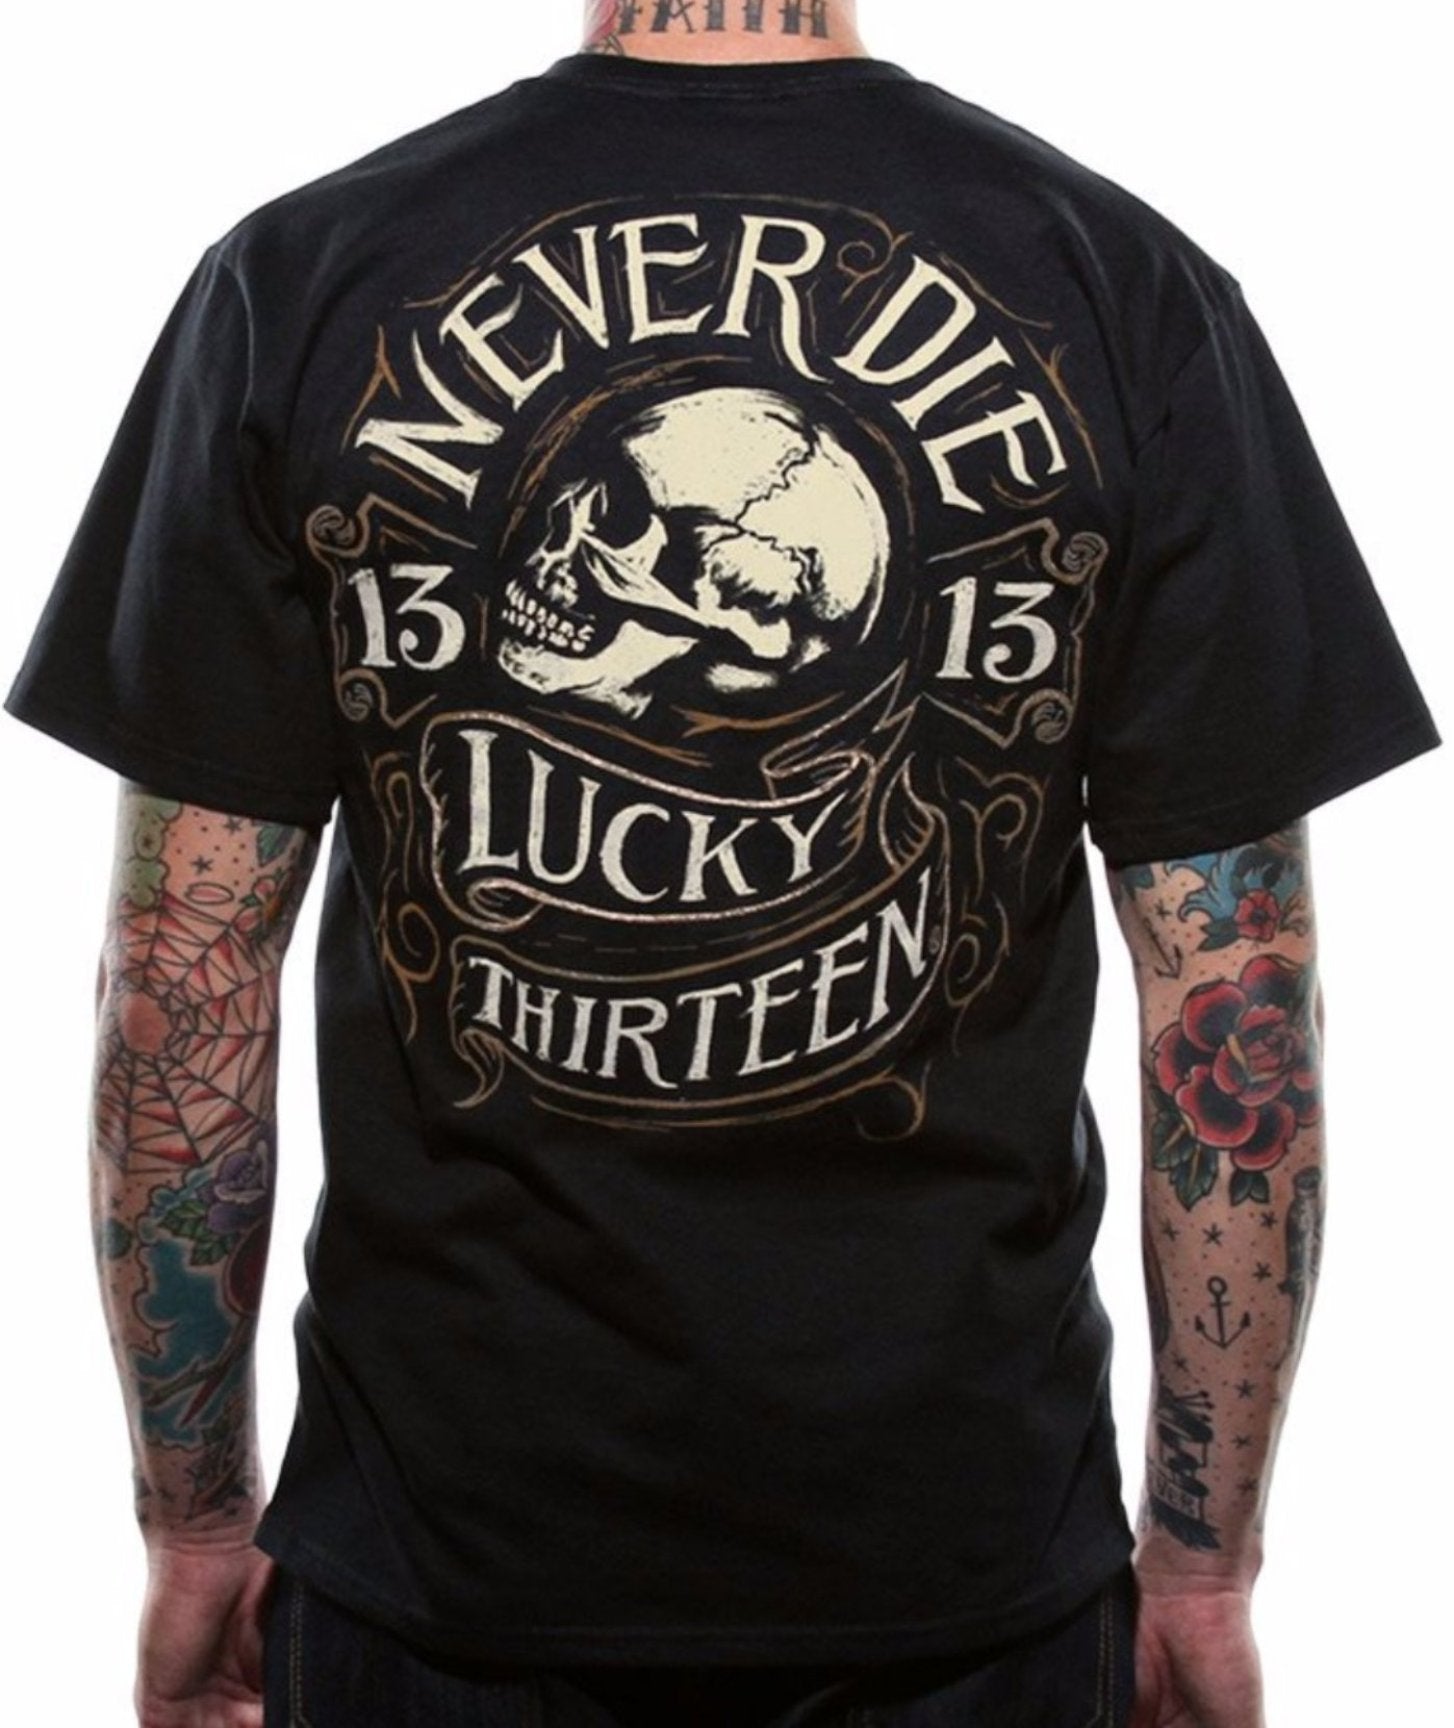 The NEVER DIE Tee Shirt